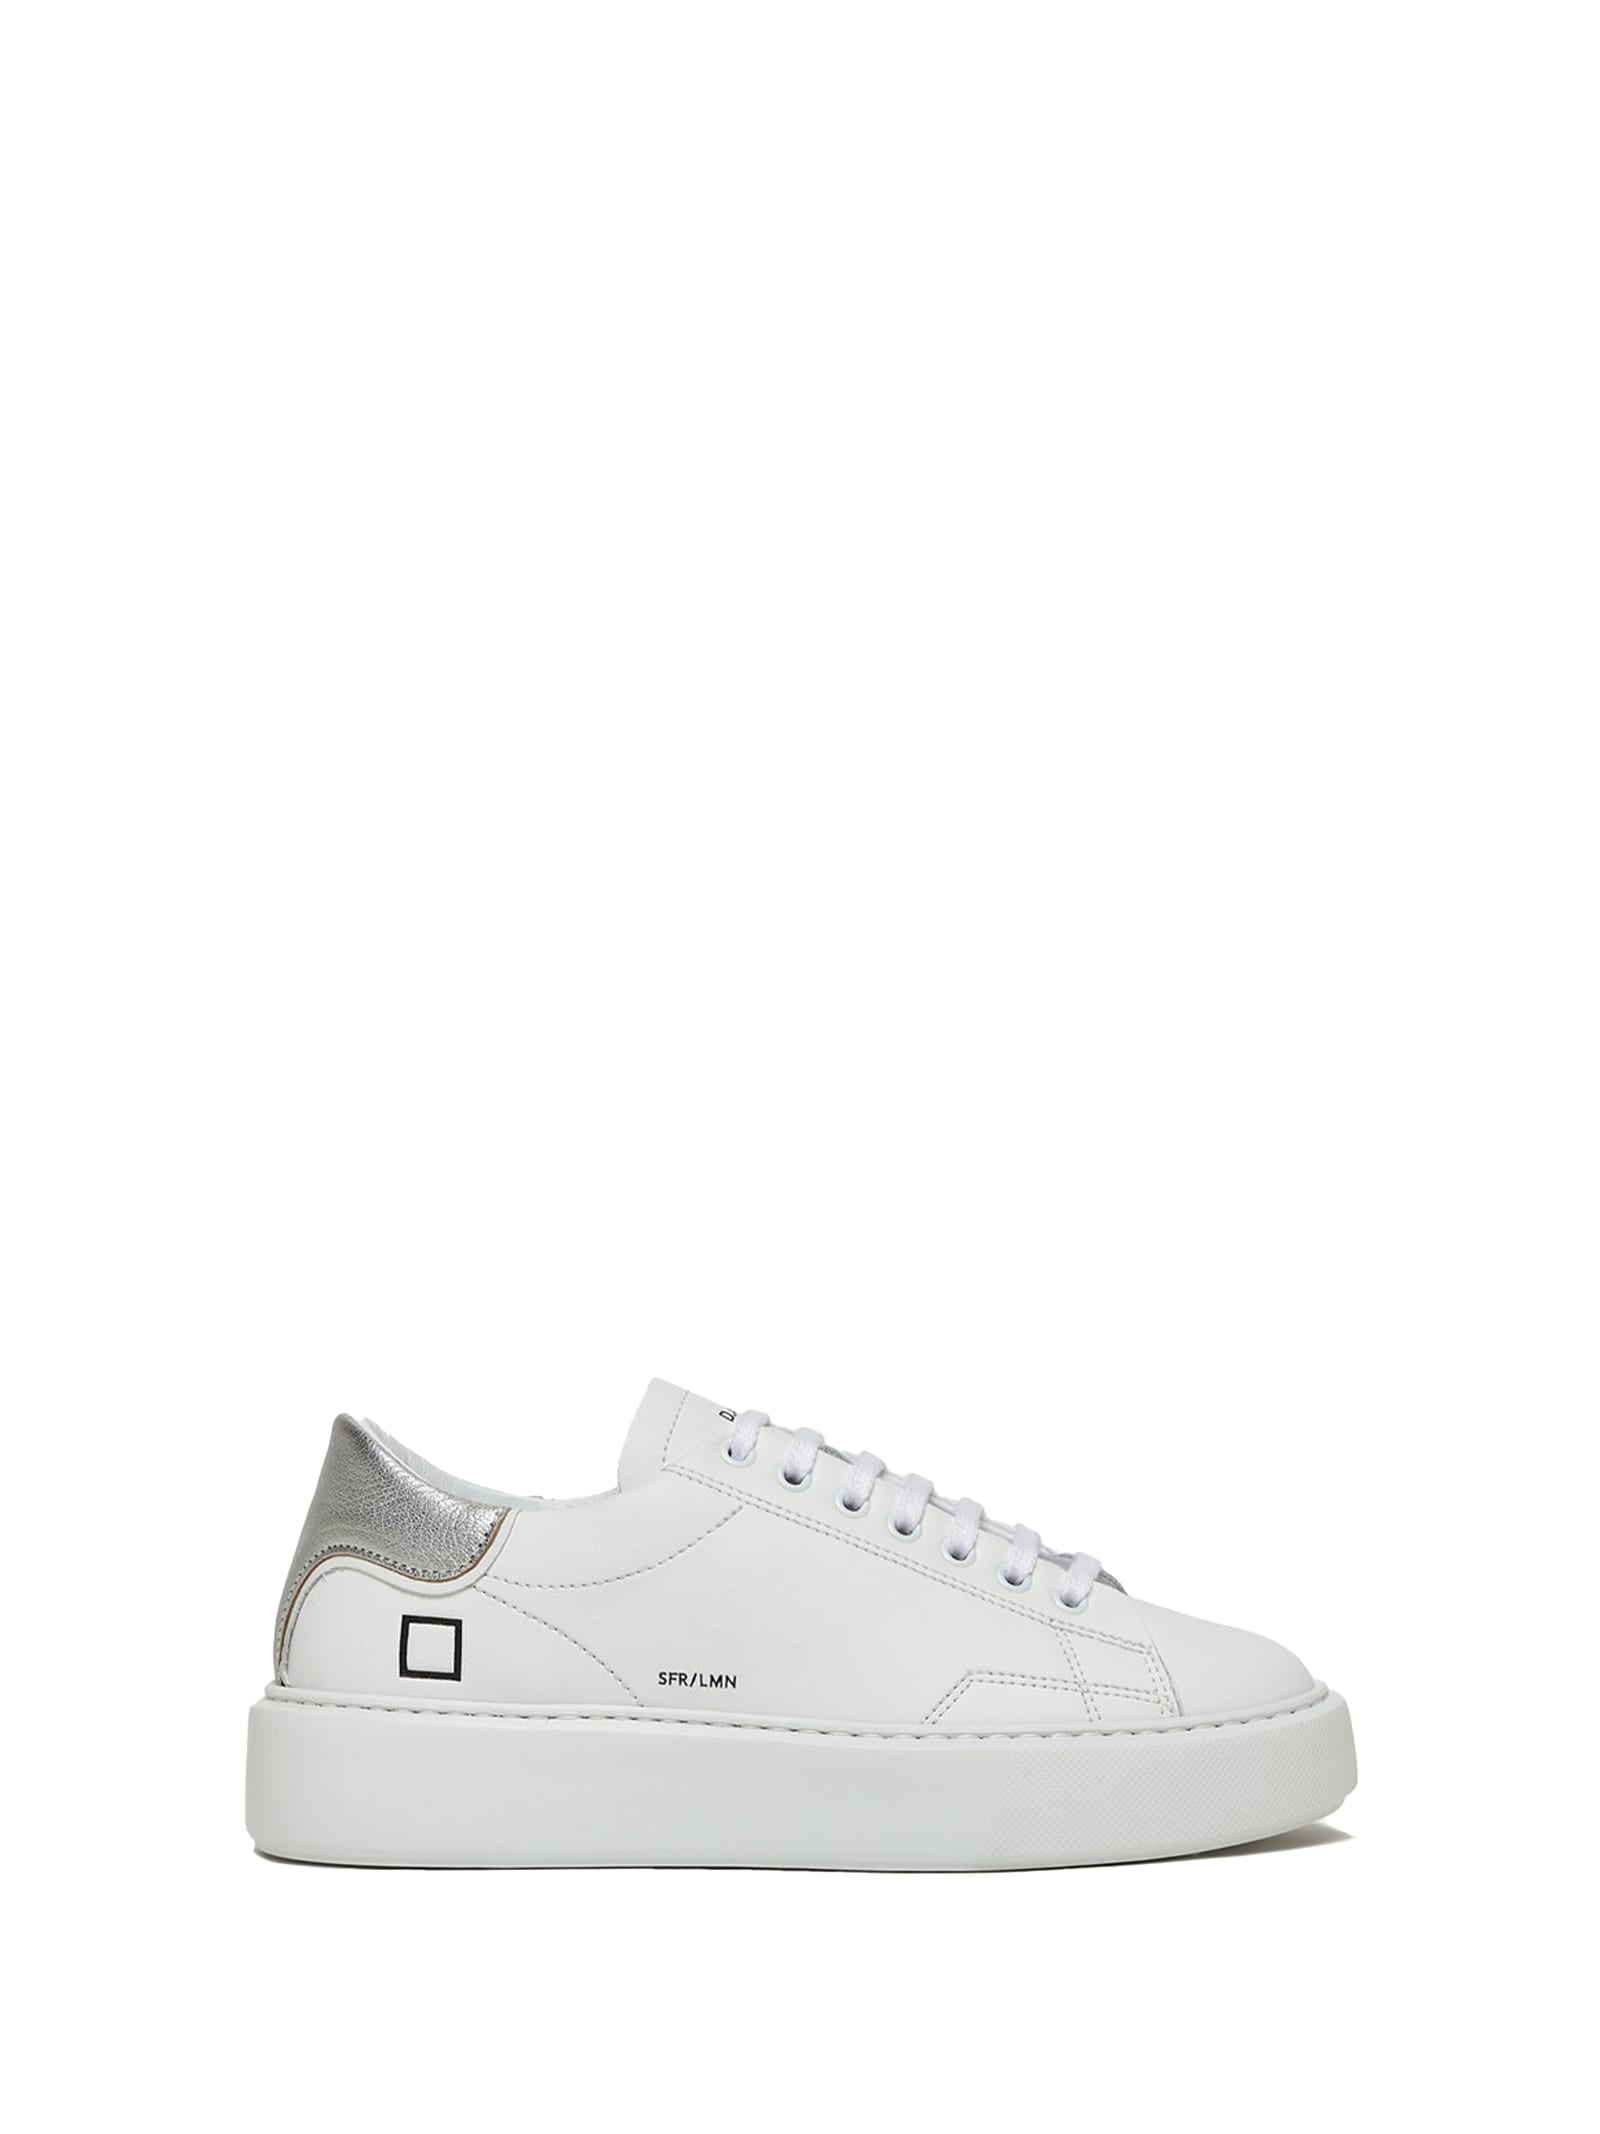 Shop Date Sfera Womens Sneaker In Leather And Silver Heel